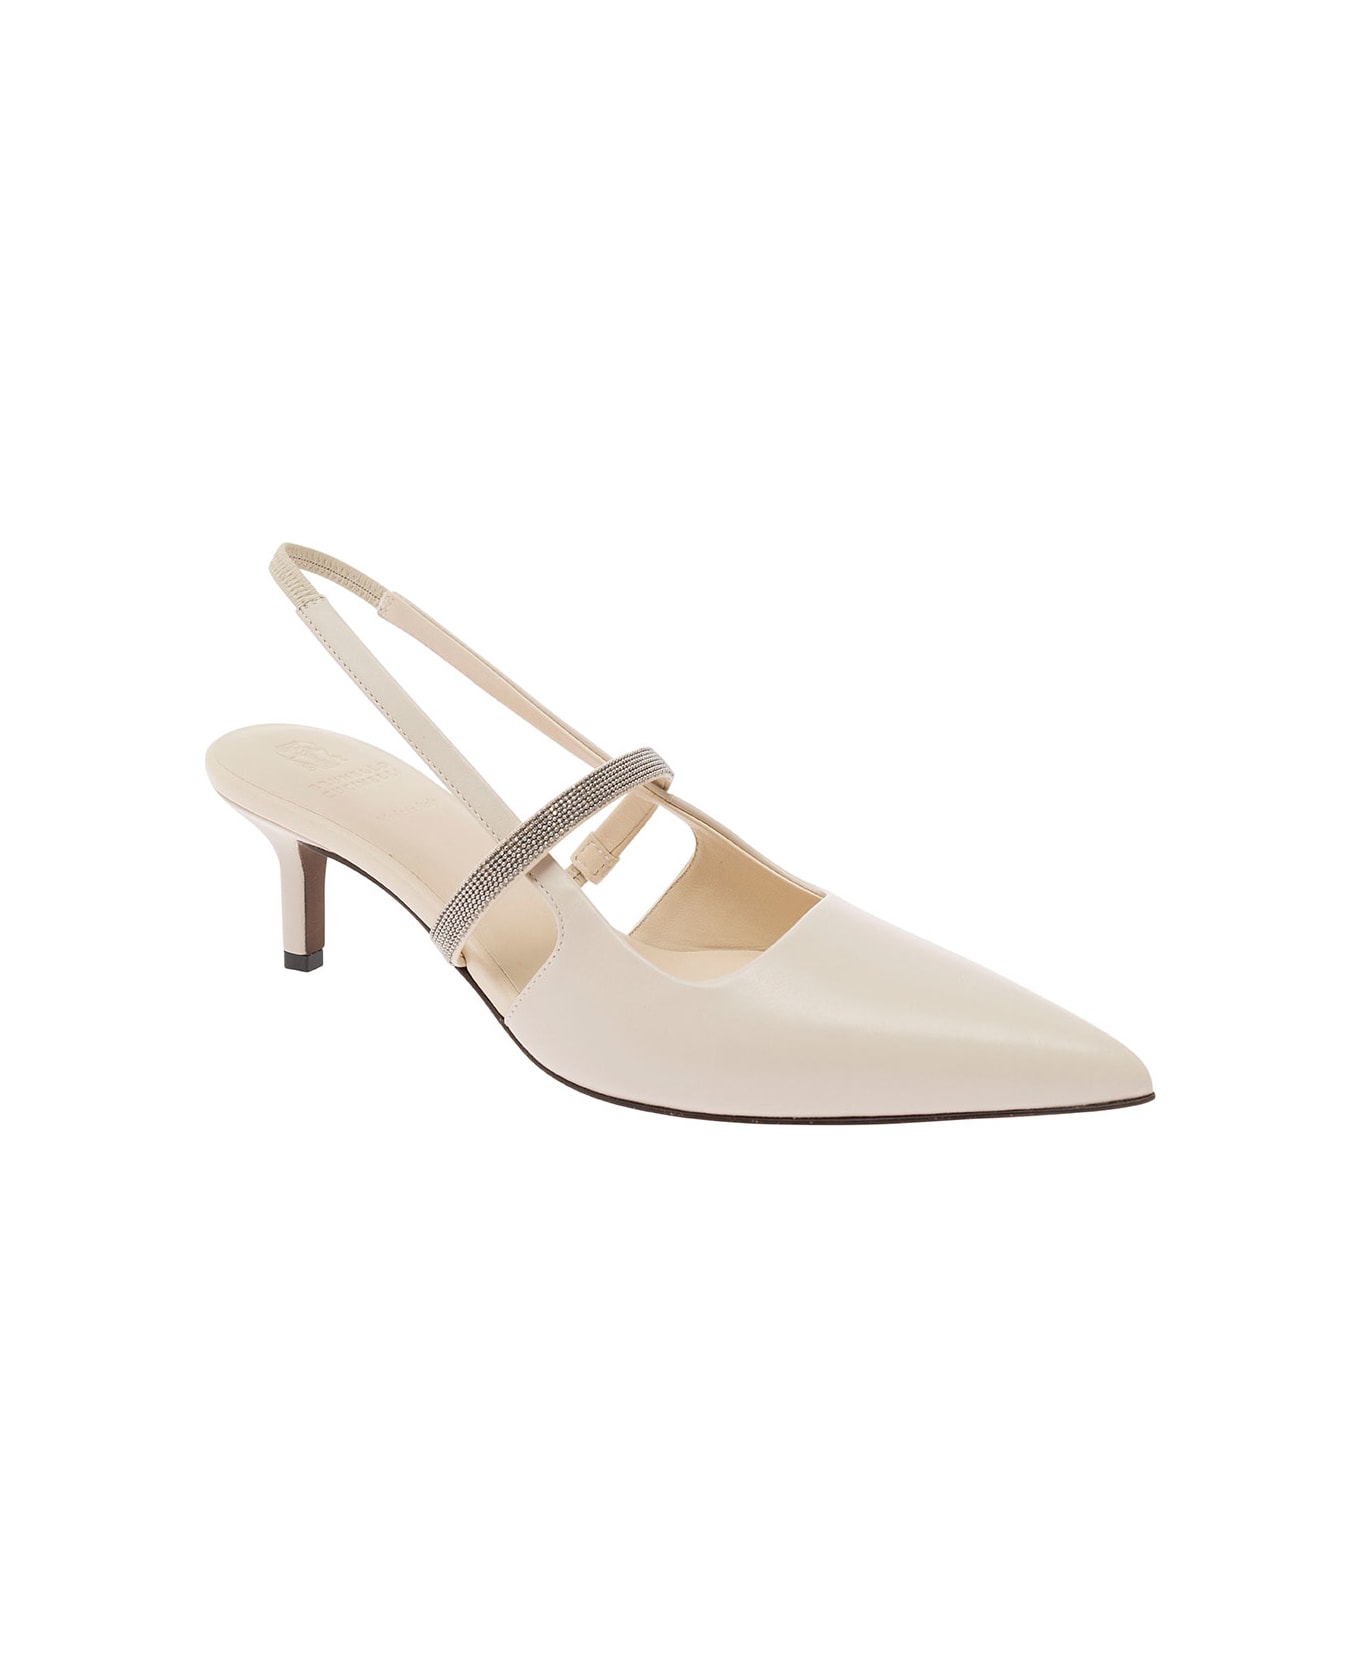 Brunello Cucinelli Ivory White Slingback Pumps With Monile Strap In Leather Woman - Grey ハイヒール